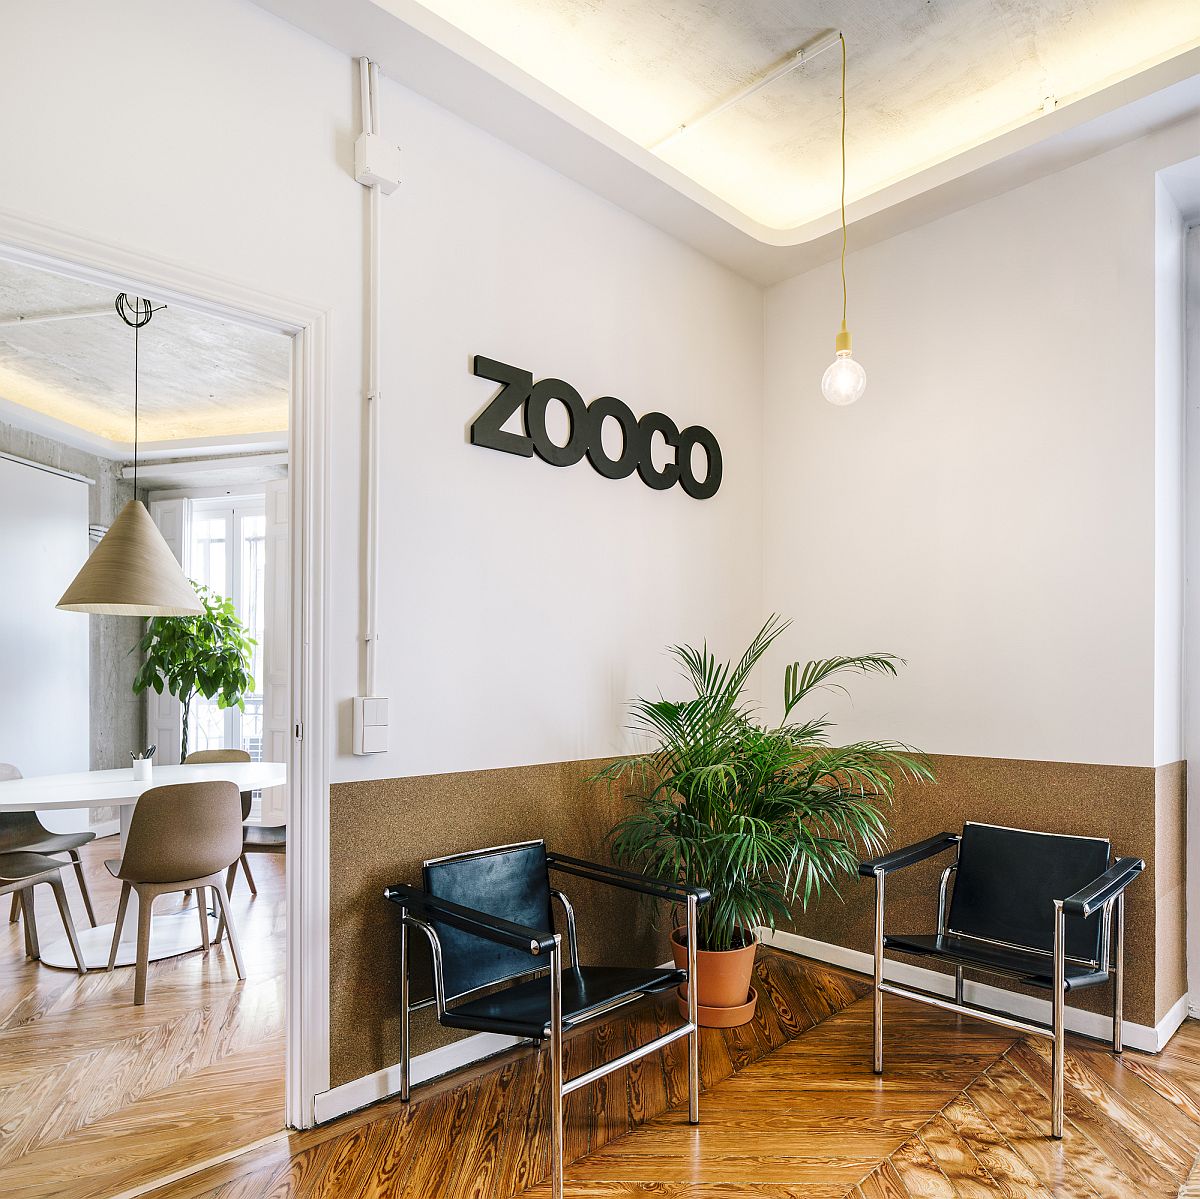 Uncovering Old Textural Charm: New Madrid Studio of Zooco Inside 140 Sqm Flat